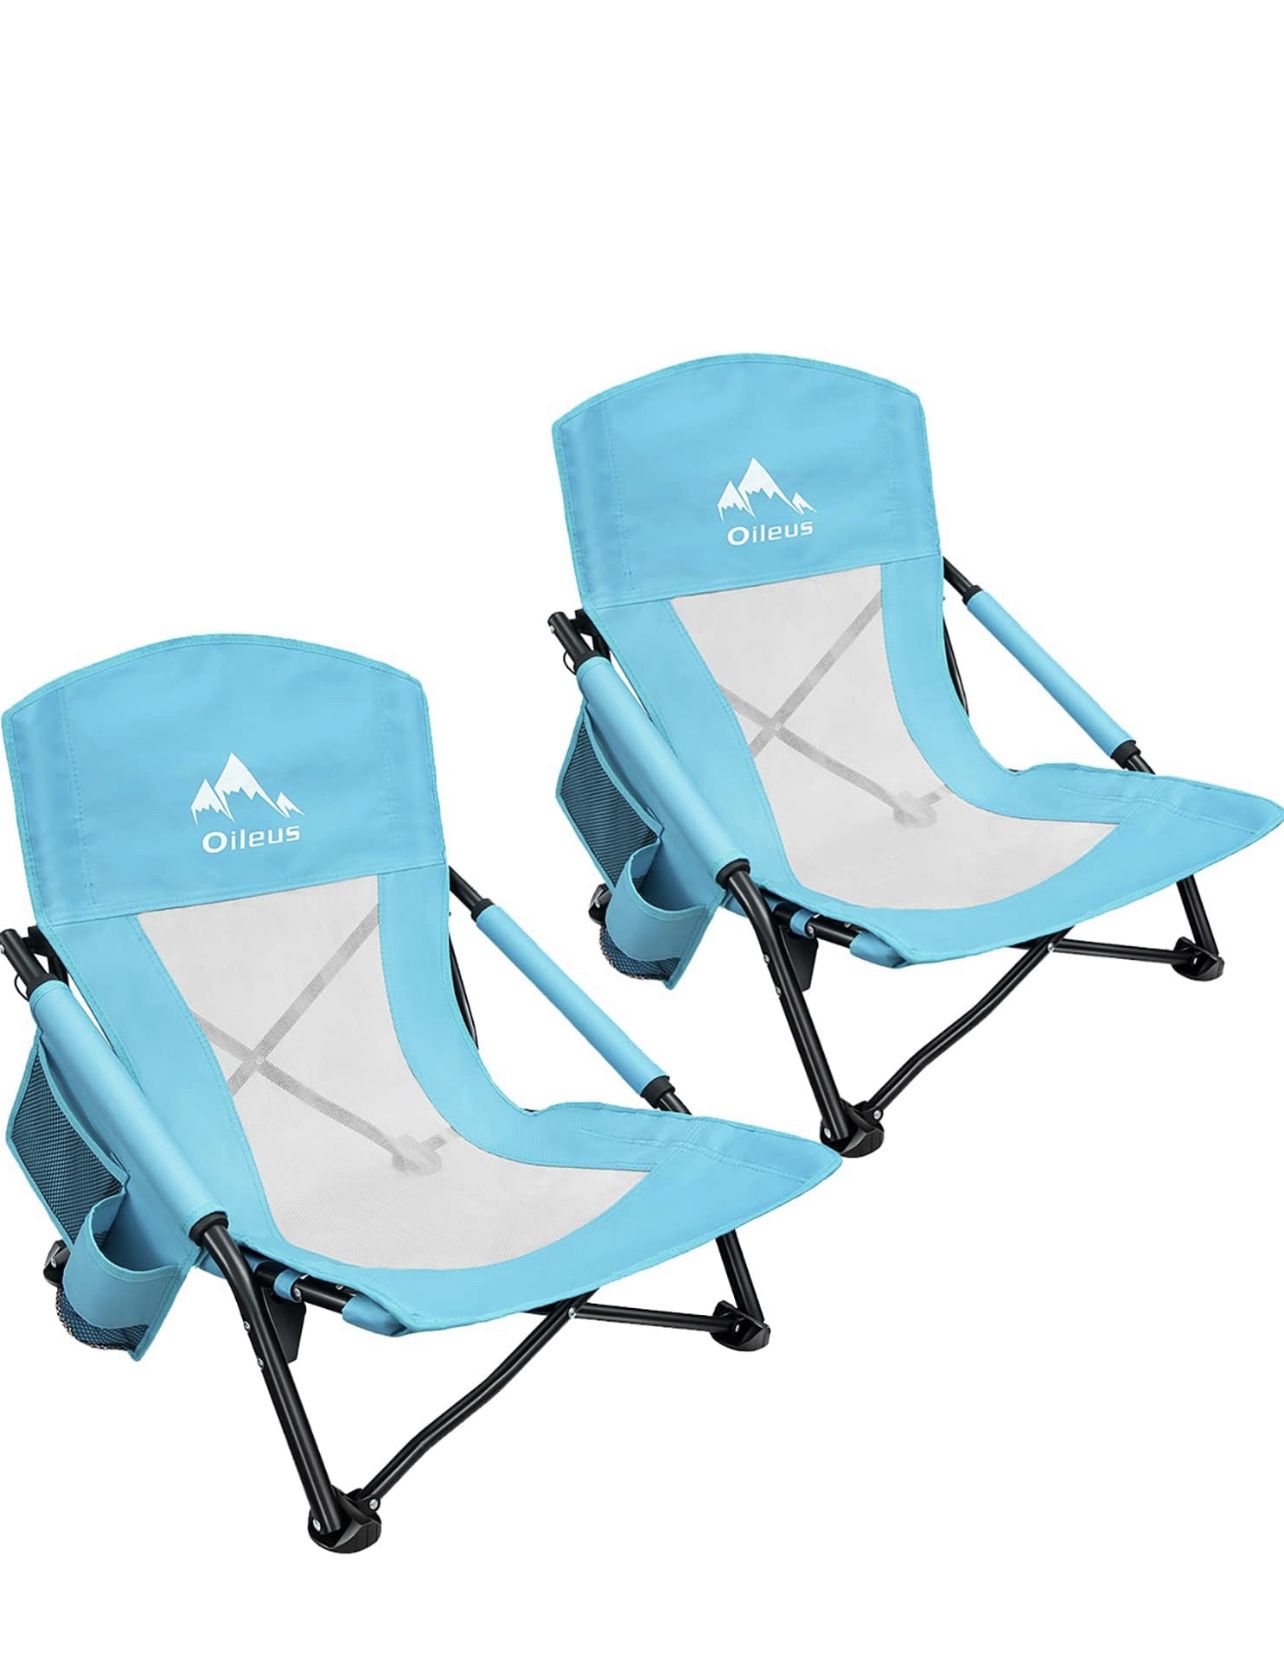 Oileus Low Beach Chair for Beach Tent & Shelter & Camping | Outdoor Ultralight Backpacking Folding Recliner Chairs with Cup Holder & Storage Bag, Carr